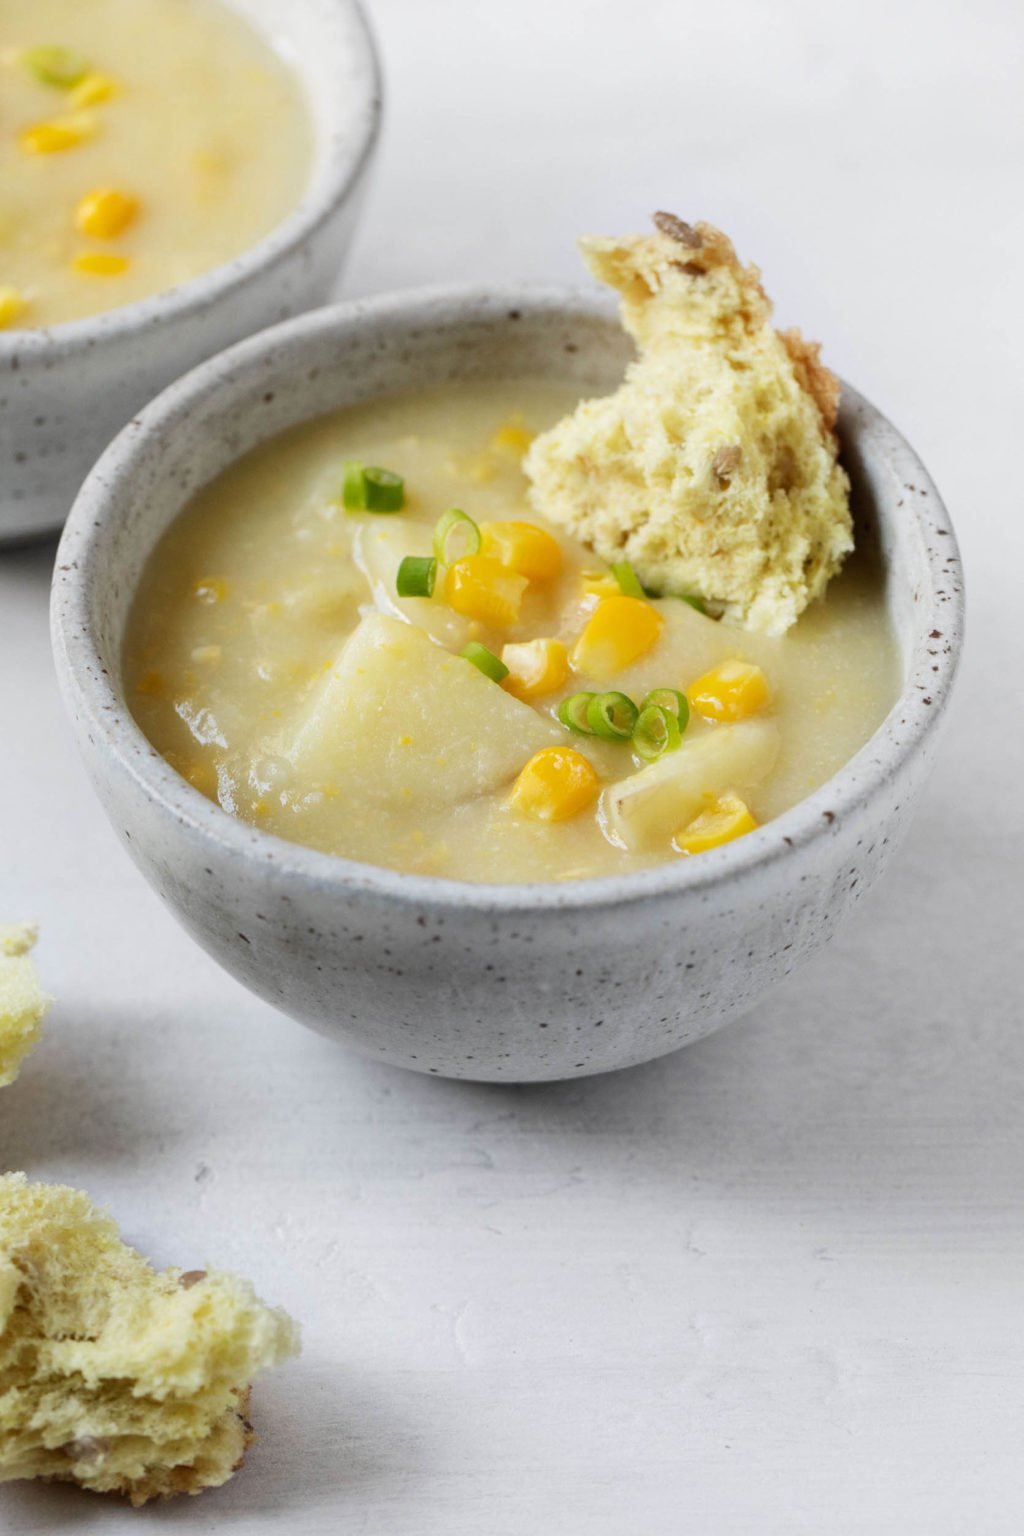 A serving bowl of vegan cauliflower corn chowder is served with a torn piece of bread dunked into the warm soup.